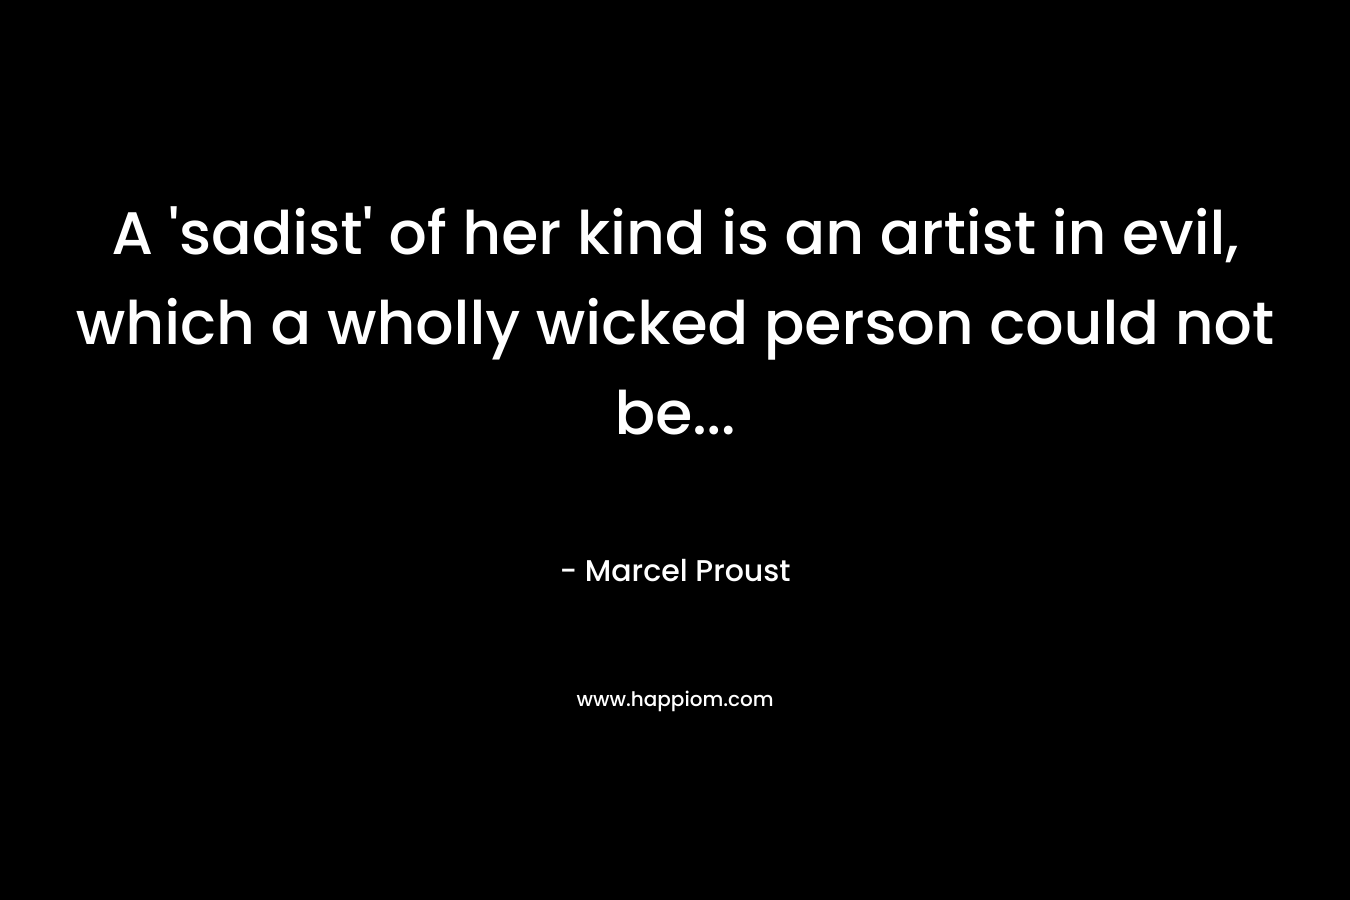 A 'sadist' of her kind is an artist in evil, which a wholly wicked person could not be...